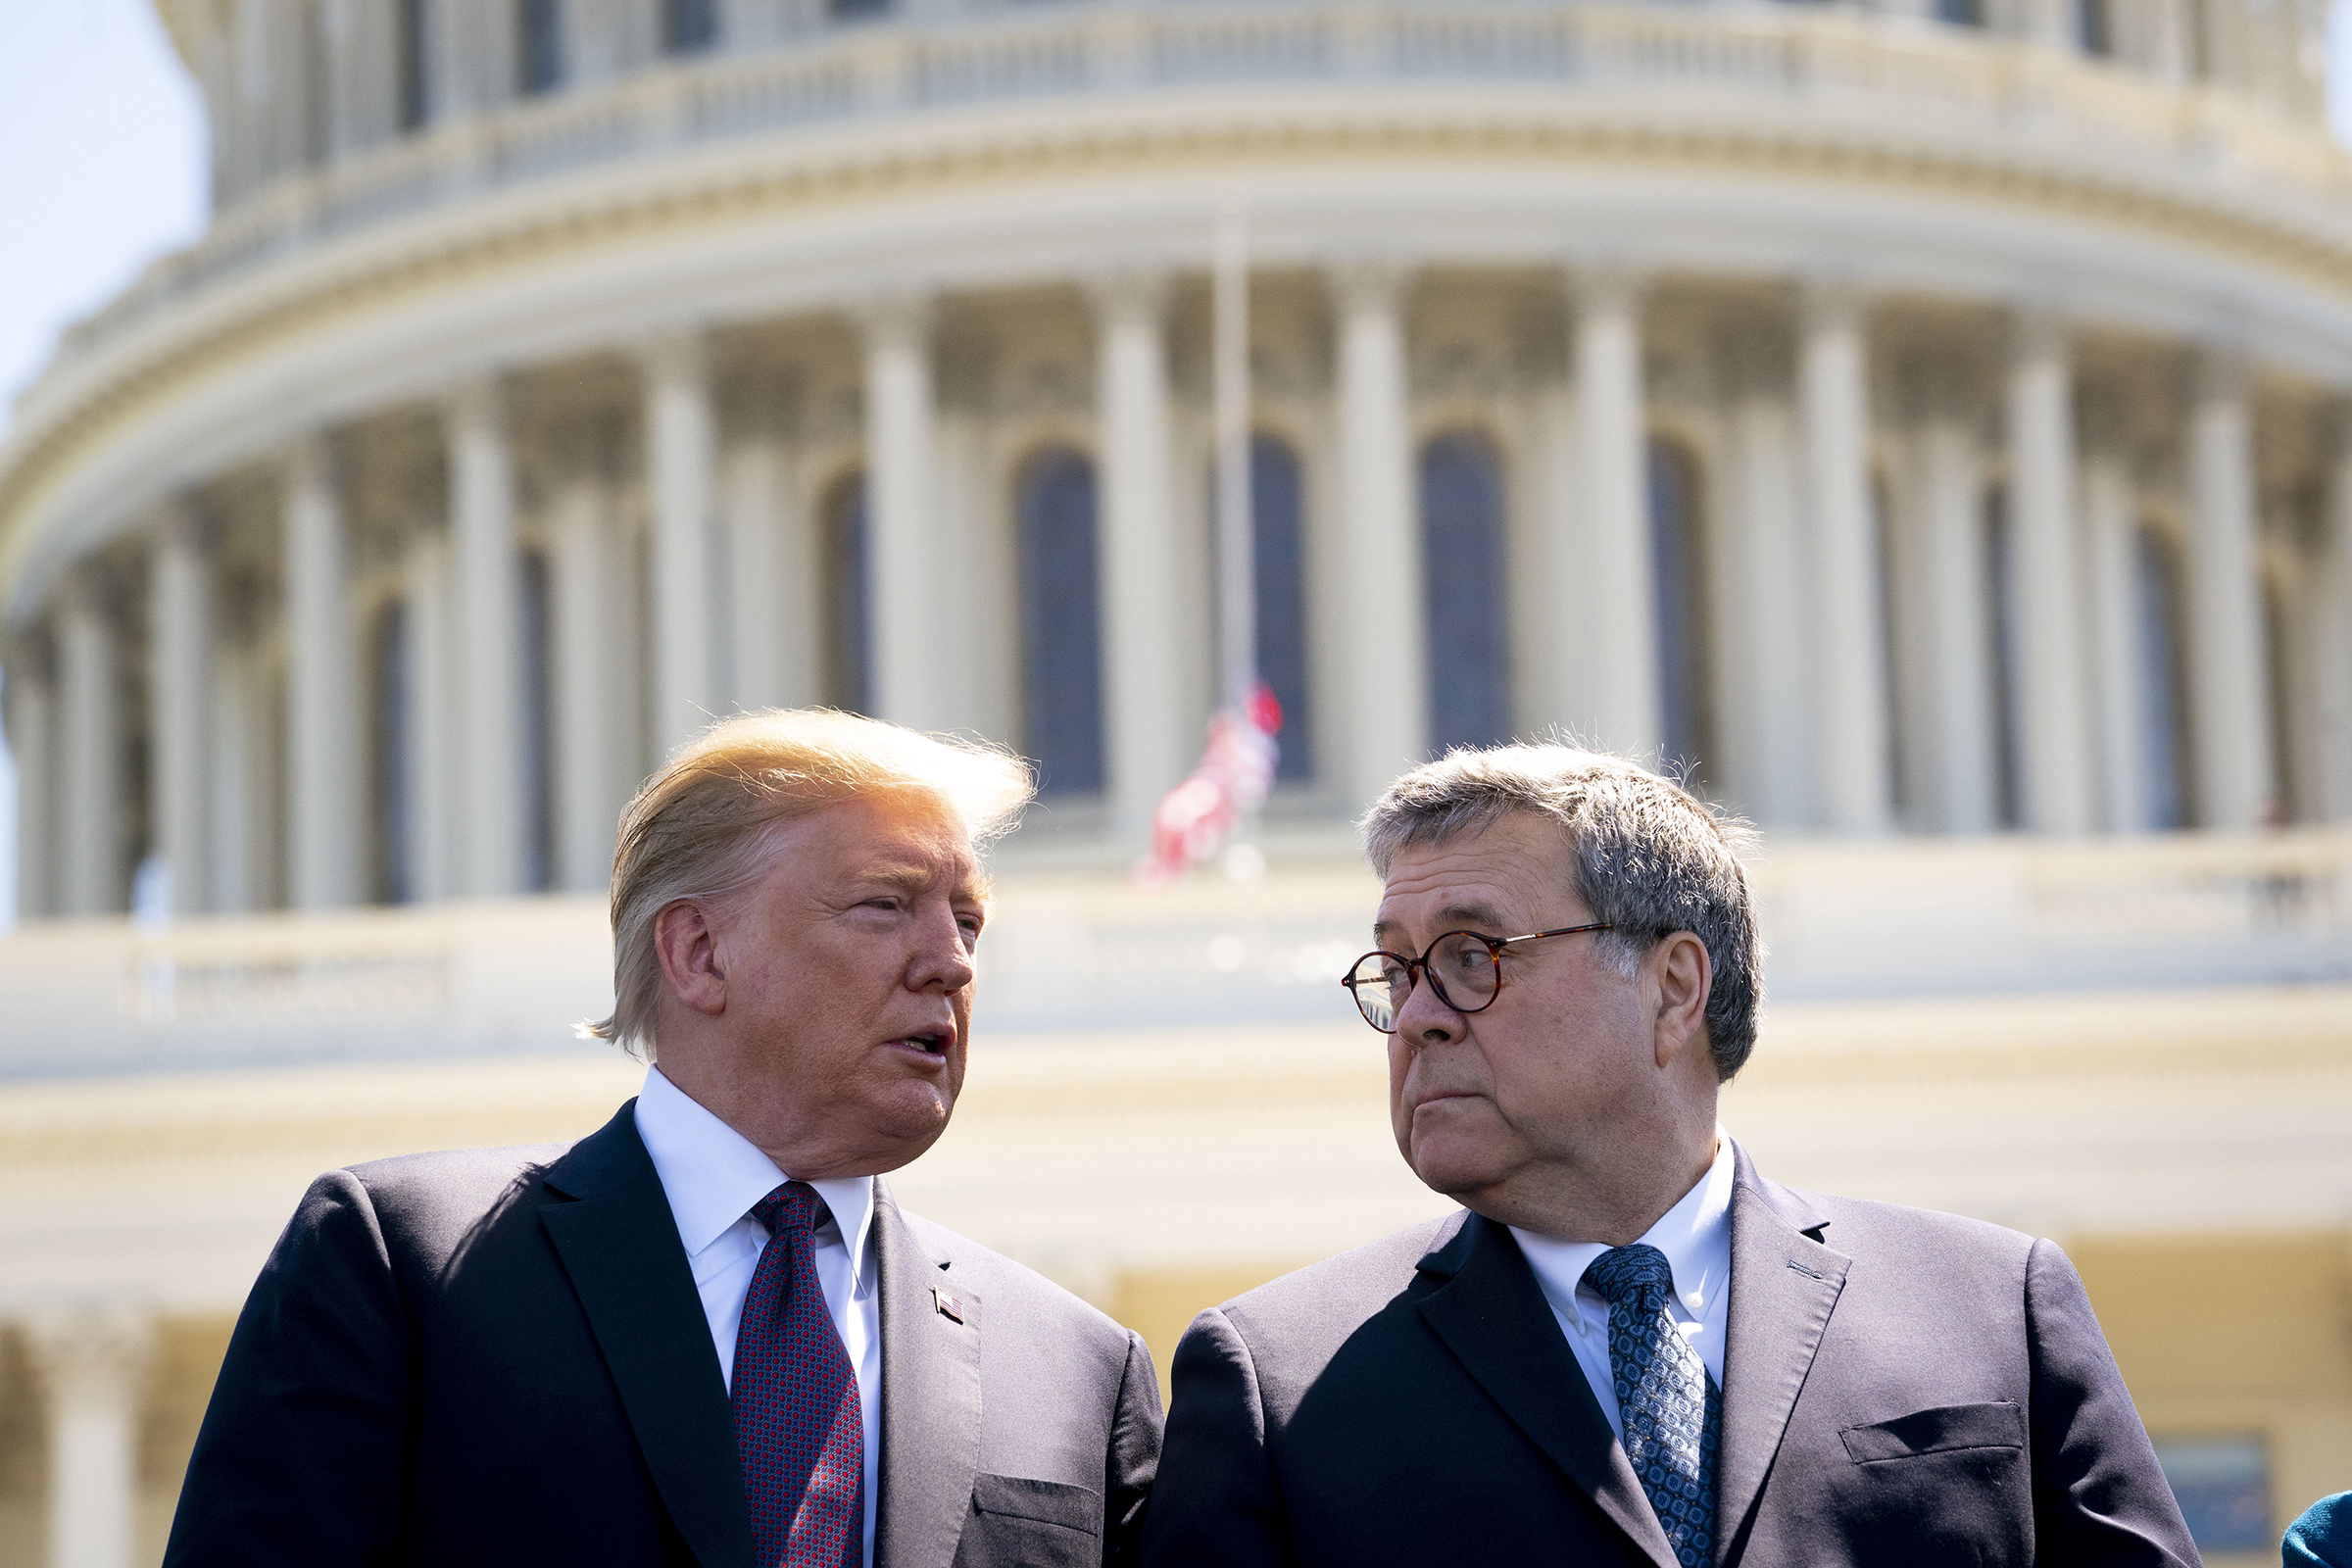 President Donald Trump and Attorney General William Barr on Capitol Hill in Washington D.C., on May 15, 2019. (Doug Mills—The New York Times/Redux)